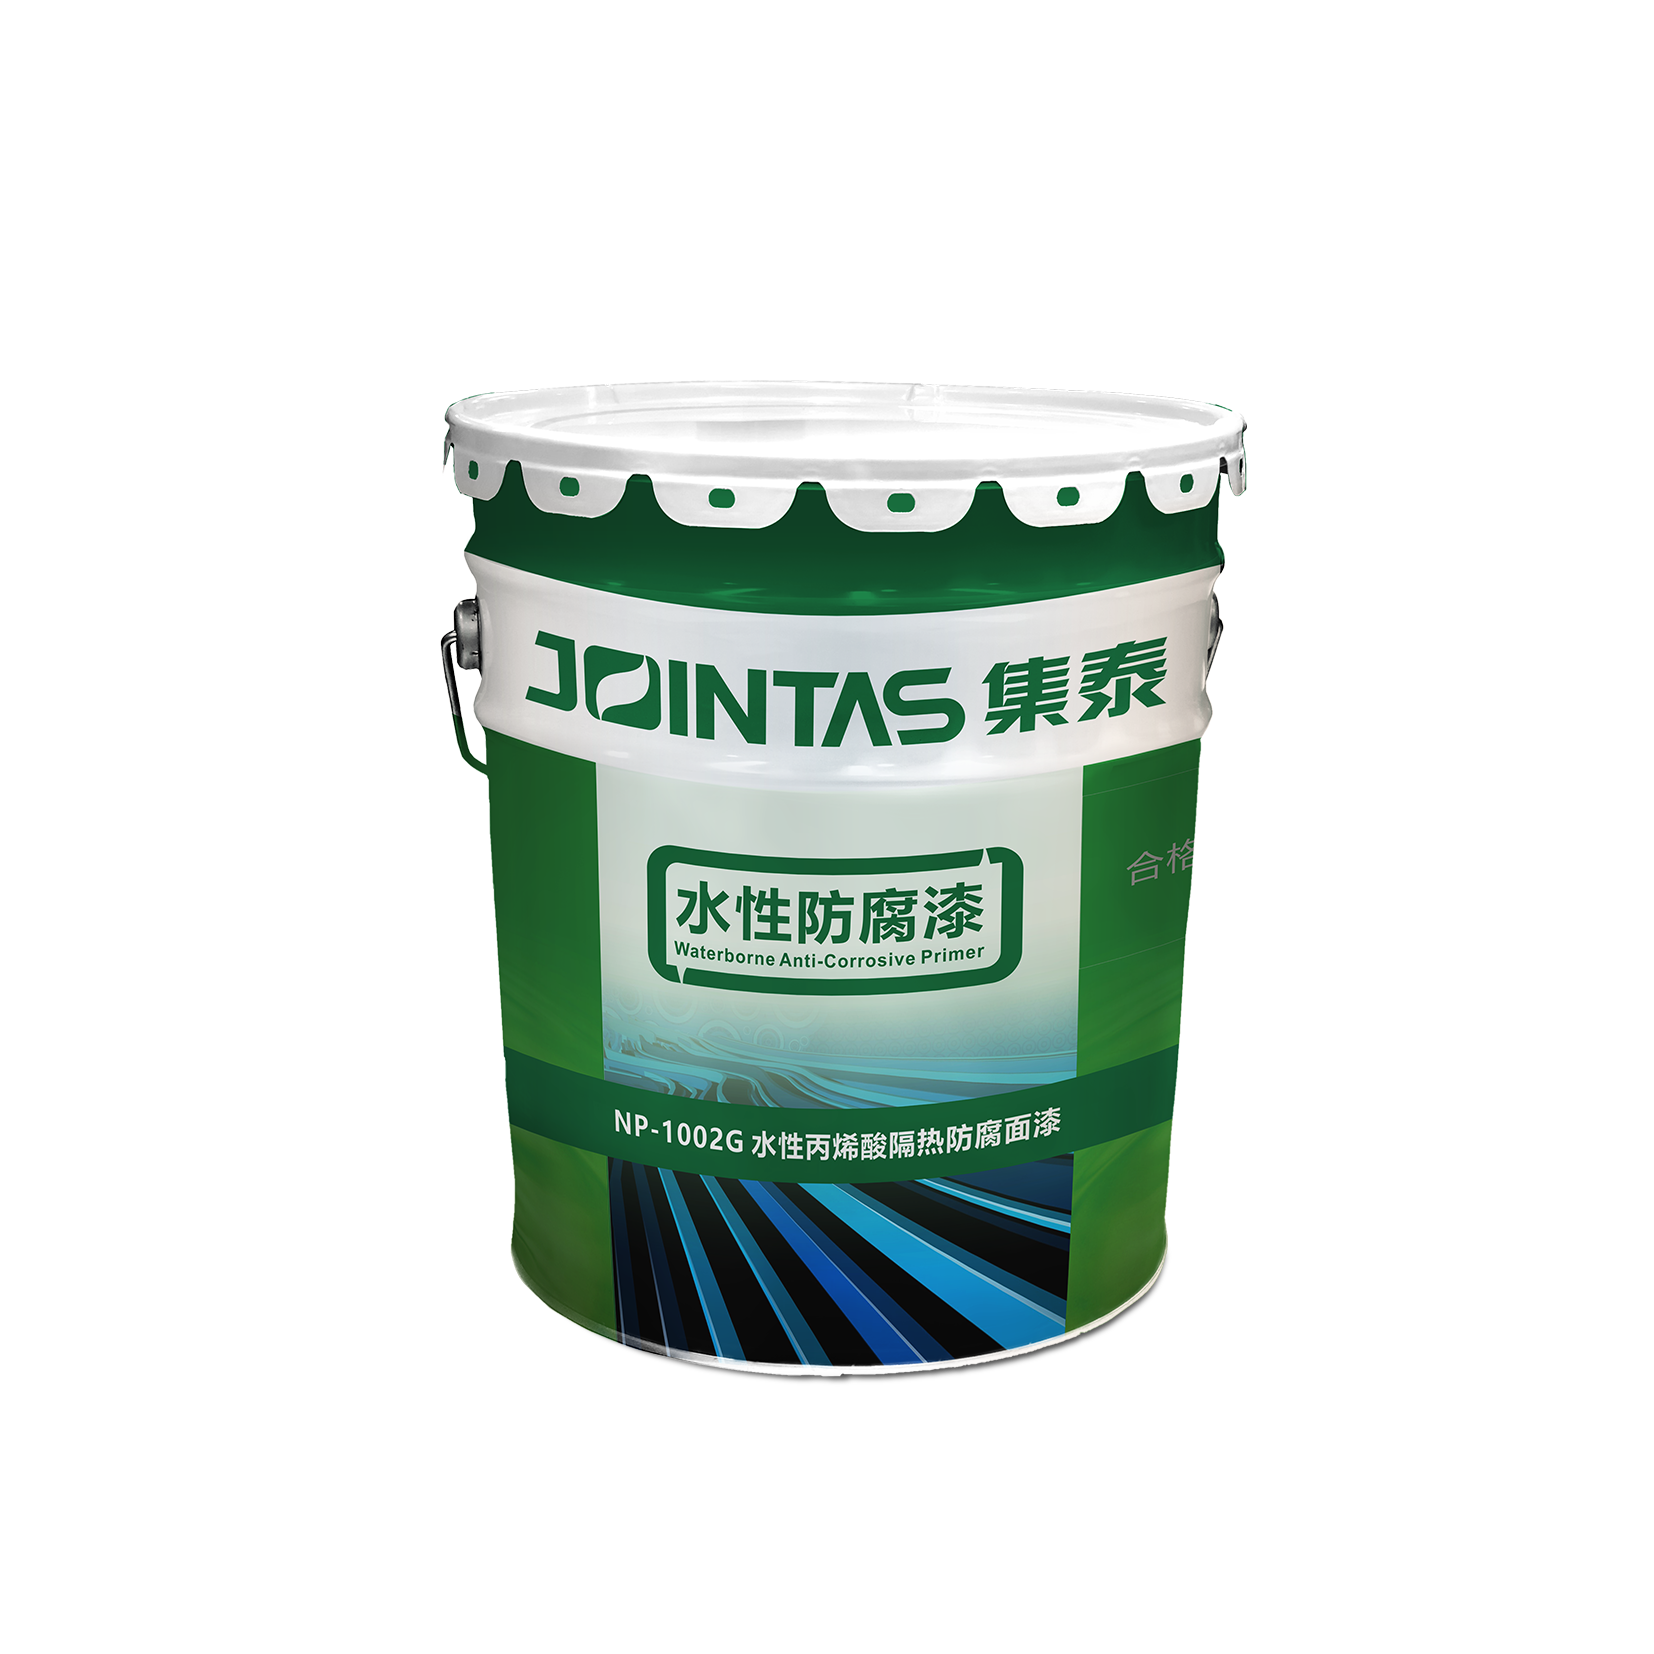 NP-1002G Water-based Acrylic Insulating and Anticorrosive Top Coating